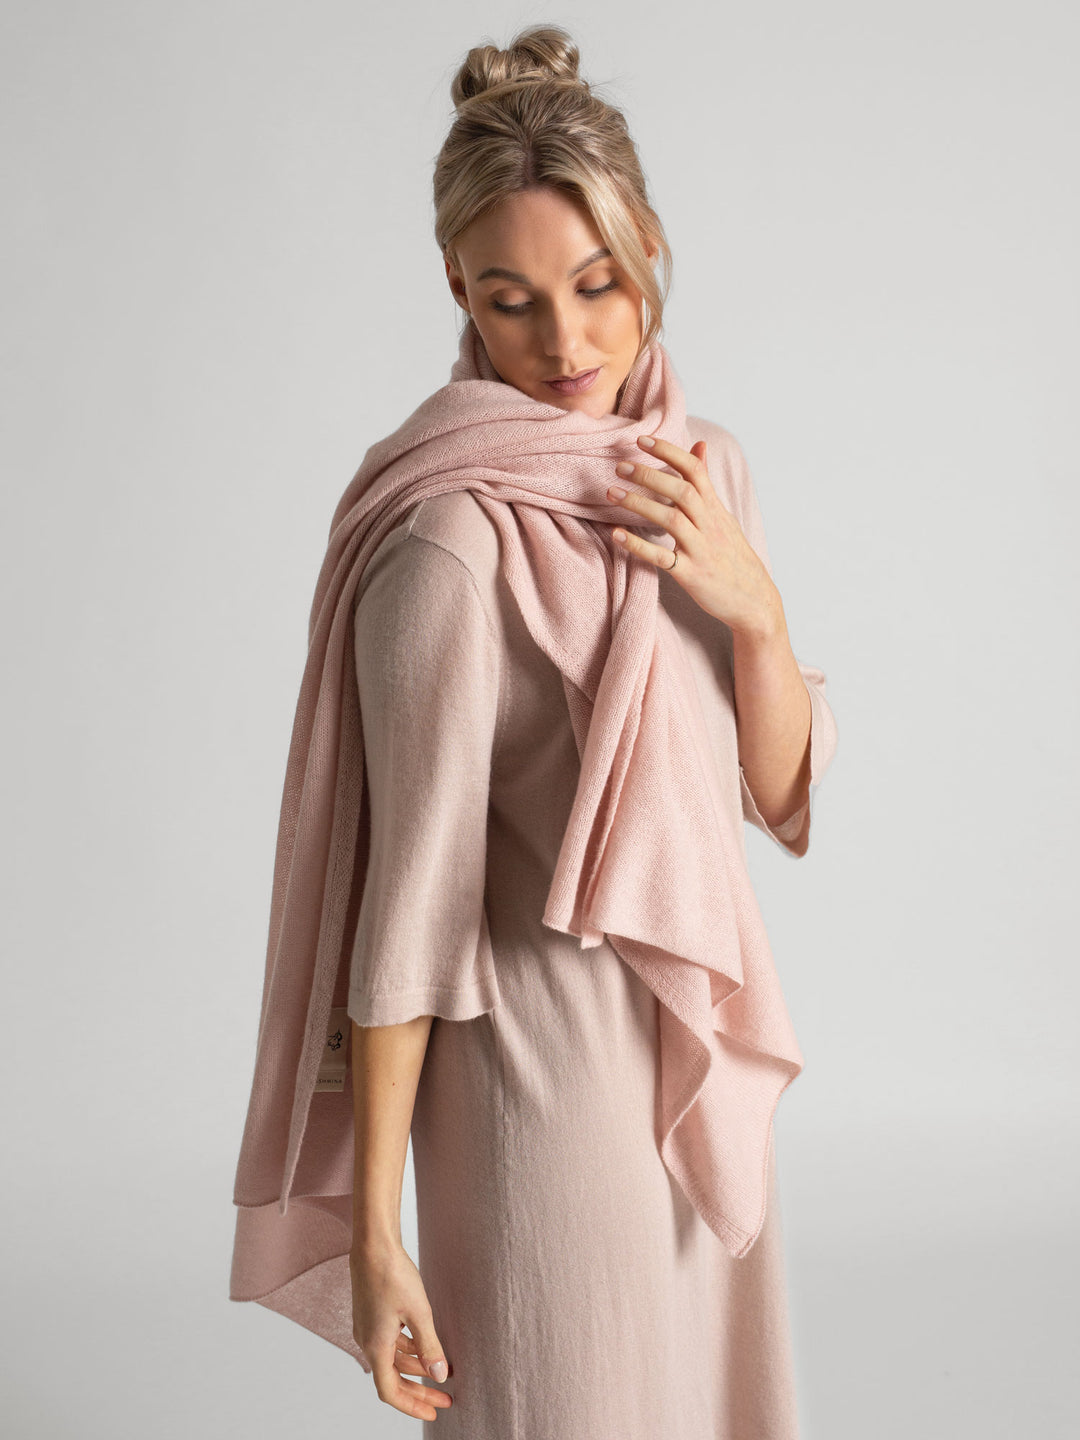 Airy cashmere scarf "Flow" in color: Rose glow. 100% cashmere from kashmina.